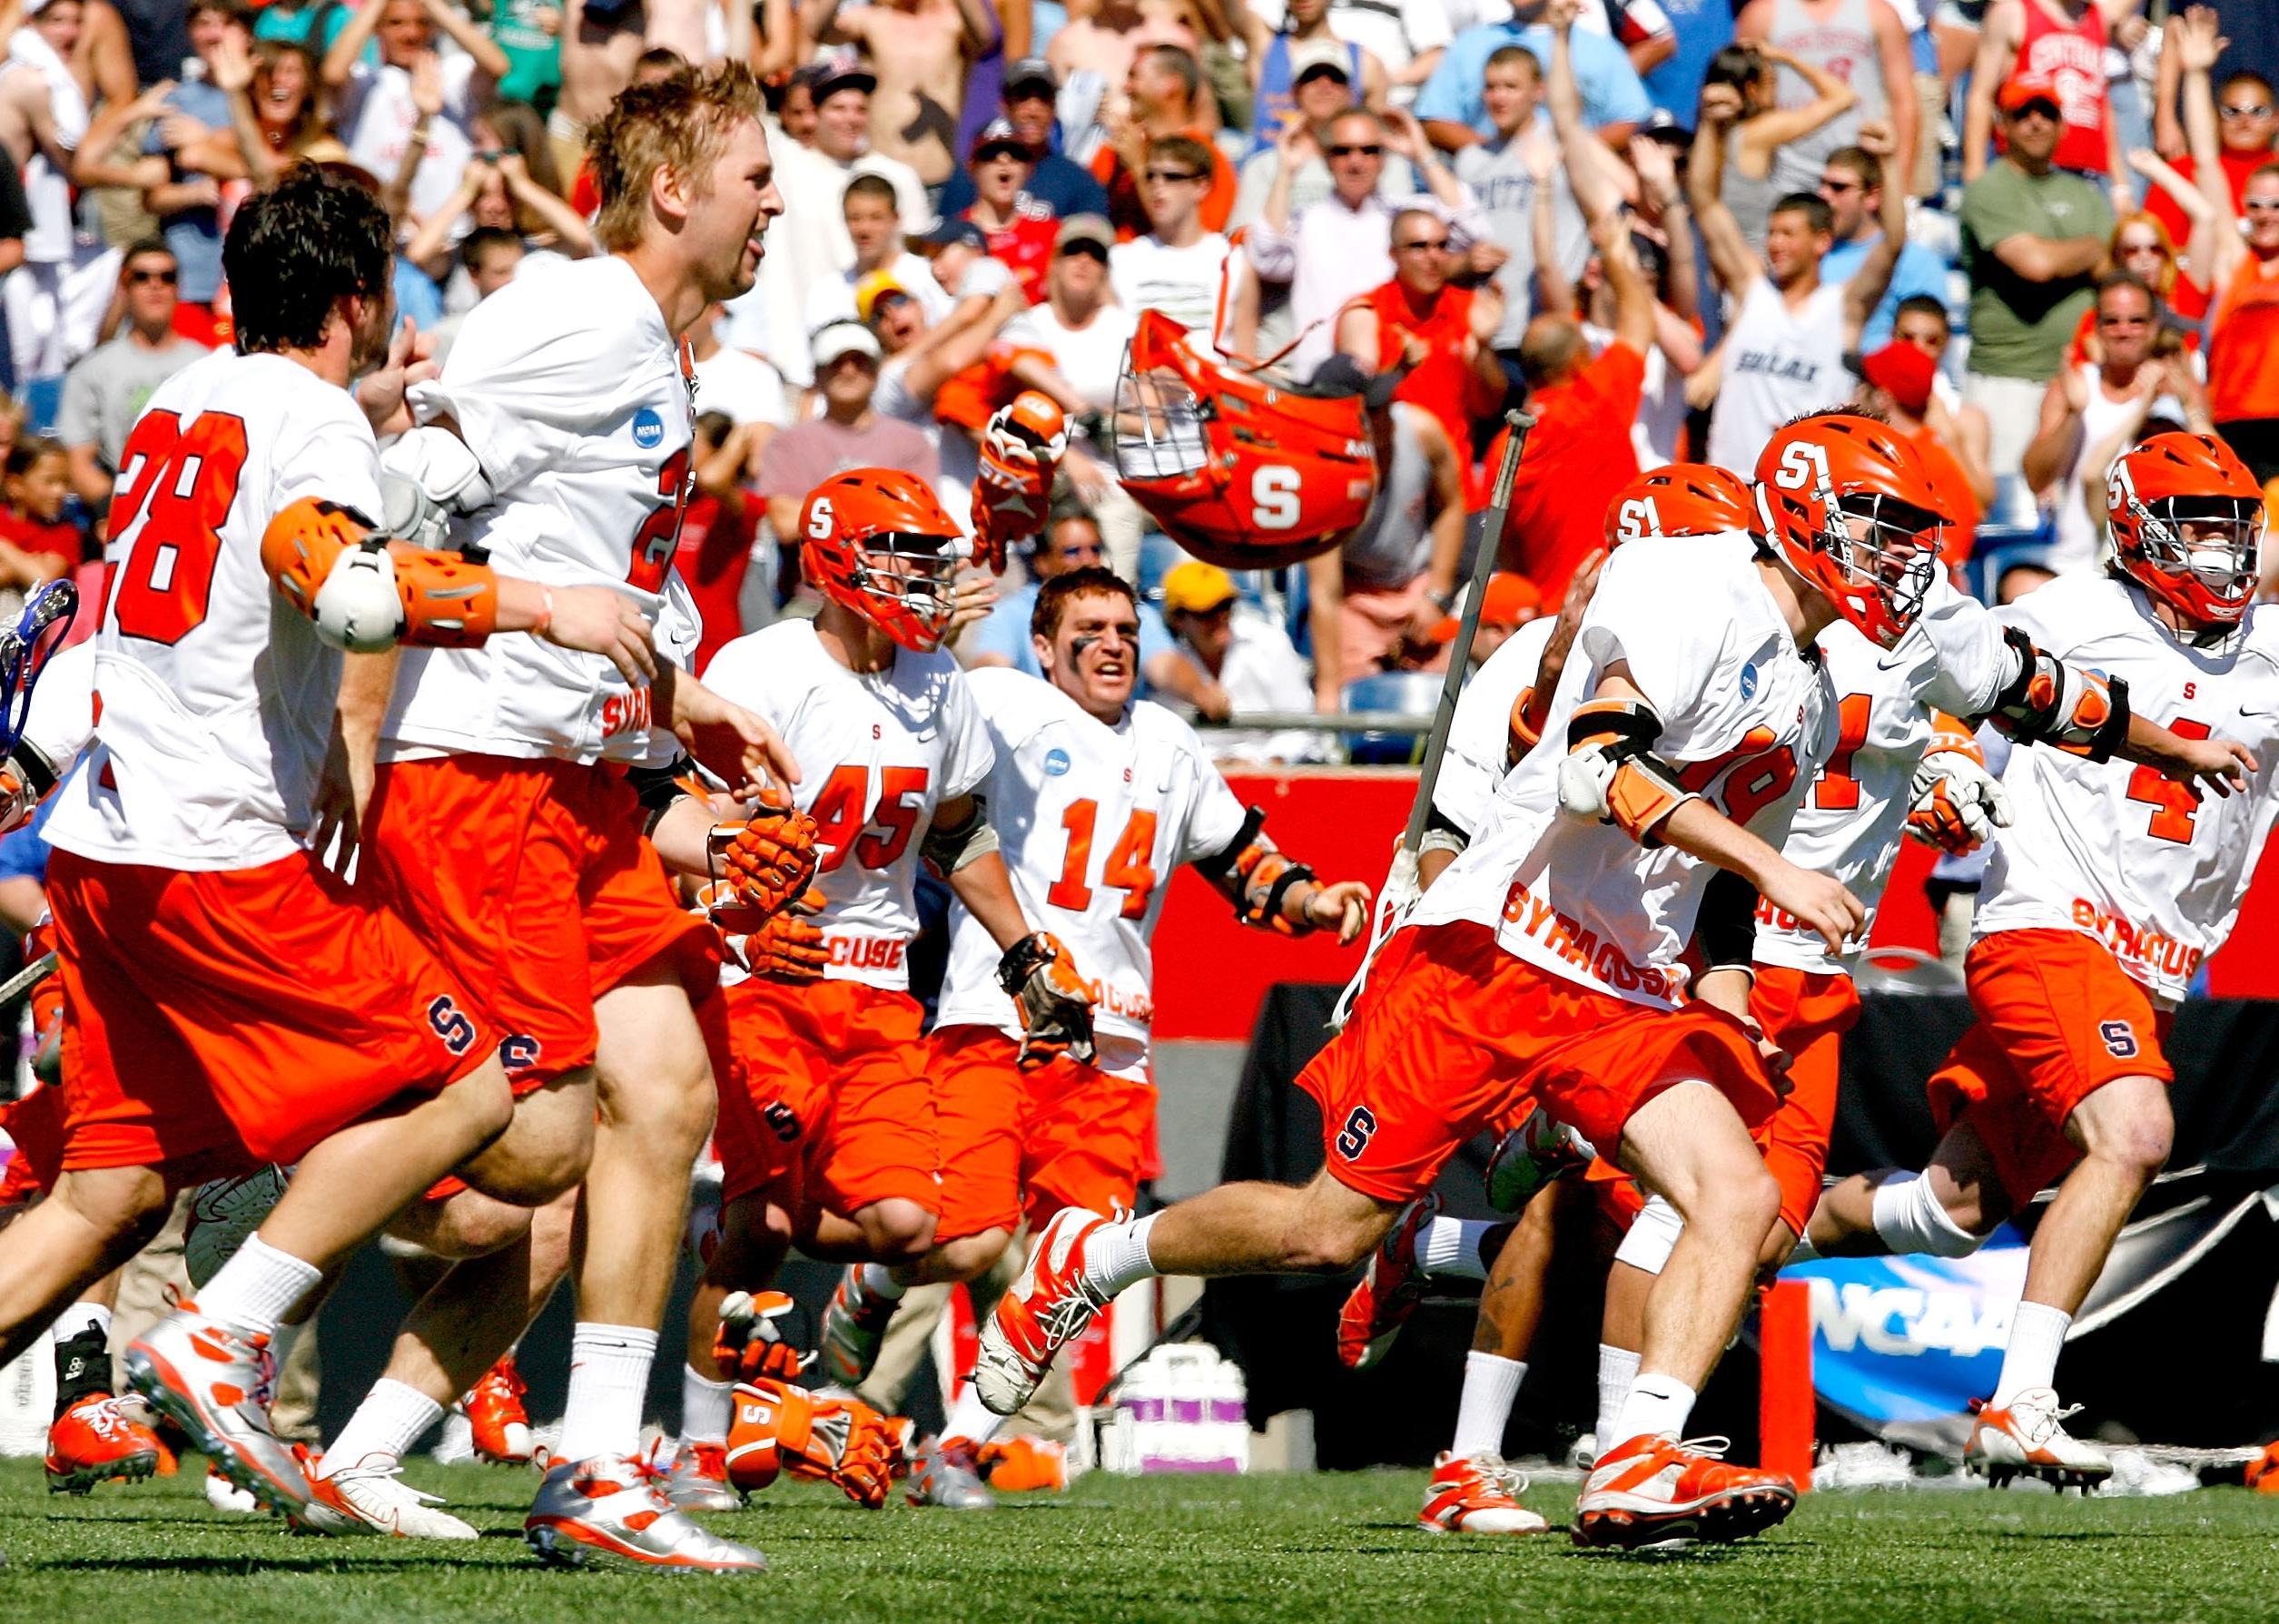 Syracuse Orange celebrates after defeating the Cornell Big Red.